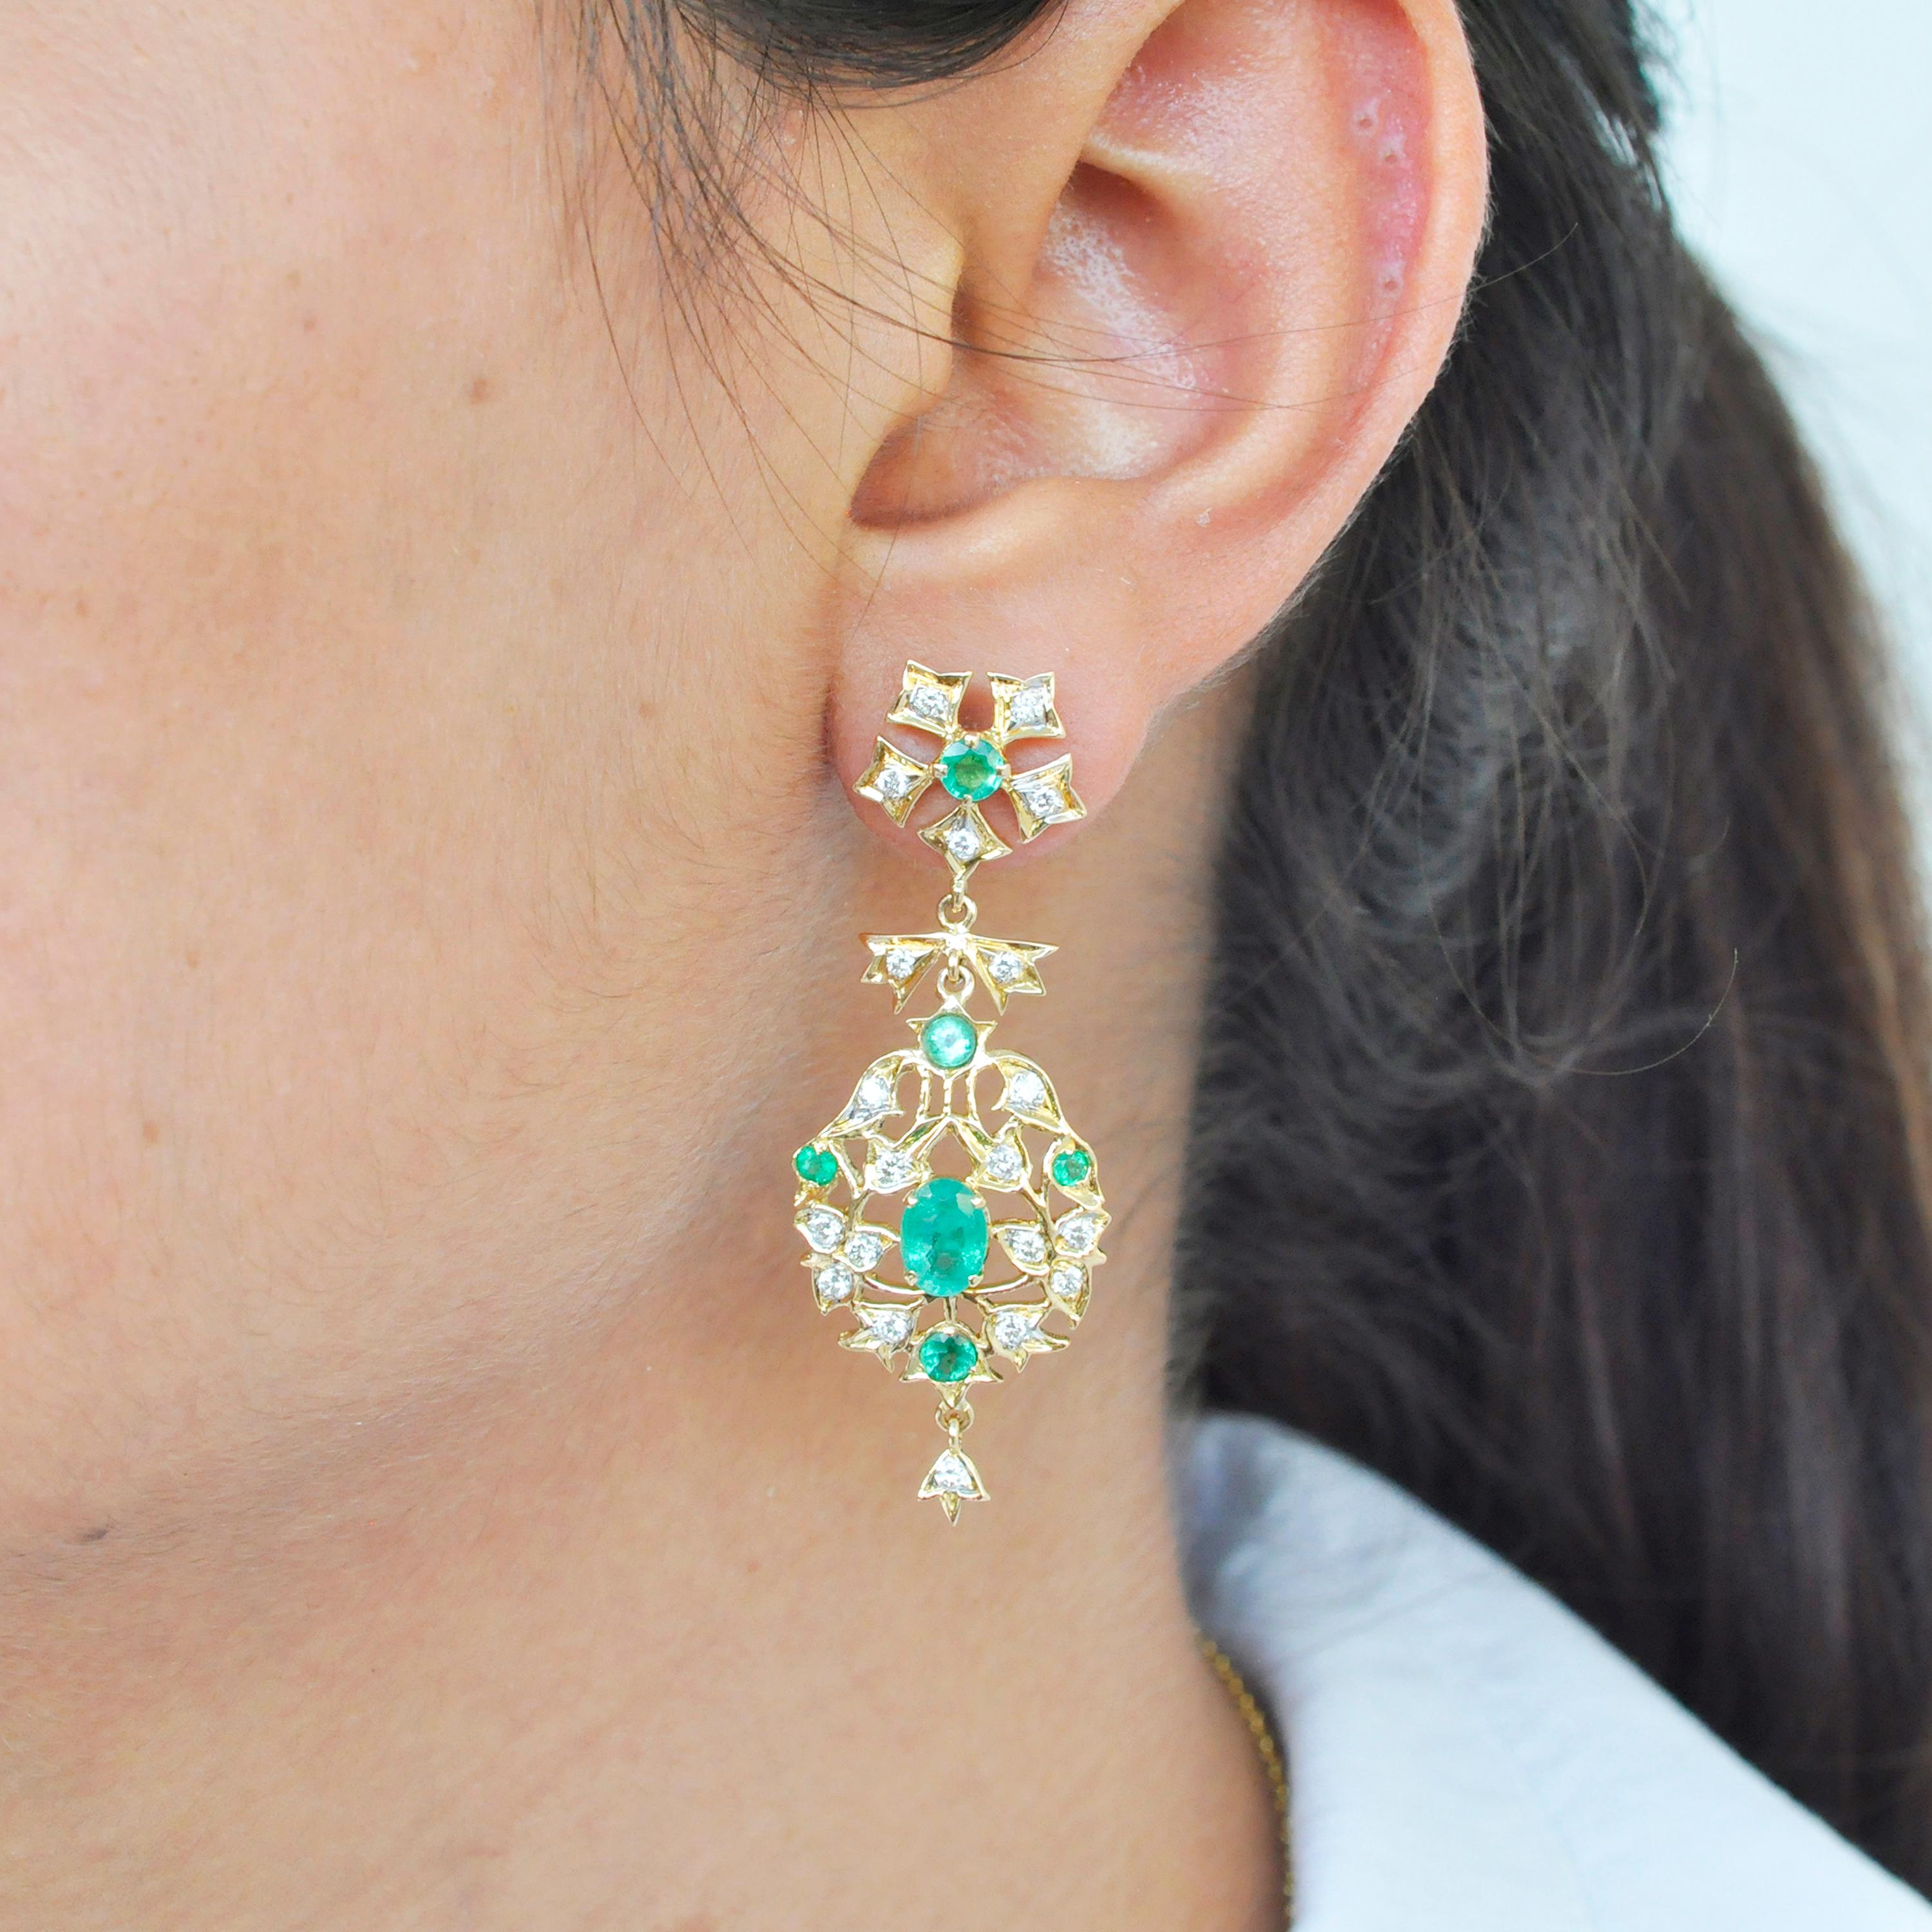 These beautiful emerald diamond dangle earrings are made in 18K gold. A mix of high quality round and oval emerald gemstones are placed in between a delicate ensemble of diamonds set in tulip motifs of gold. If you are looking for something chic and